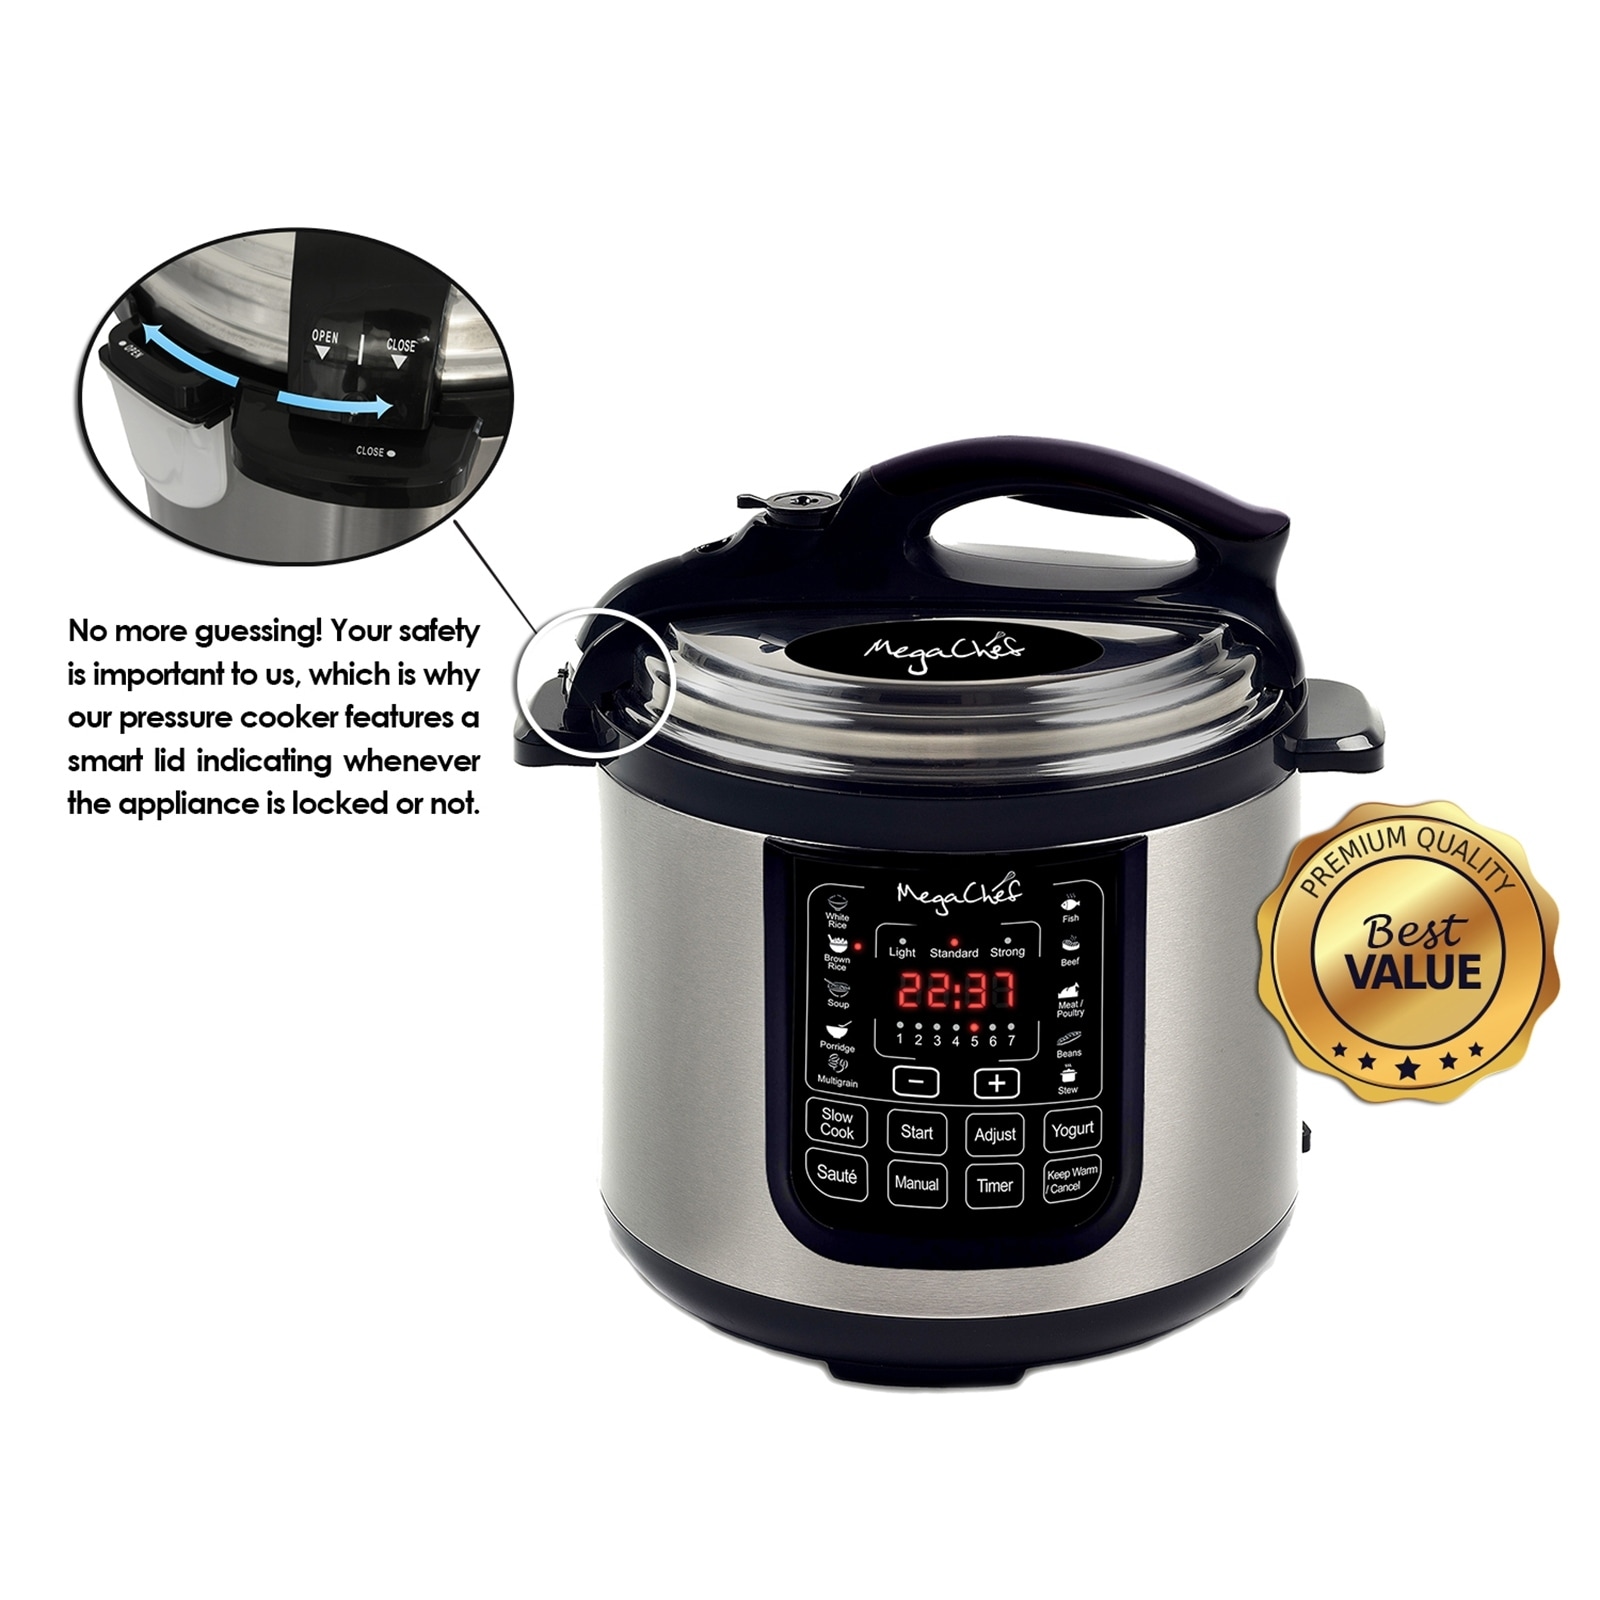 https://ak1.ostkcdn.com/images/products/is/images/direct/fe93c0e6c4b2415b862df560b968e878d974c2f0/MegaChef-Digital-Countertop-Pressure-Cooker-with-8-Quart-Capacity.jpg